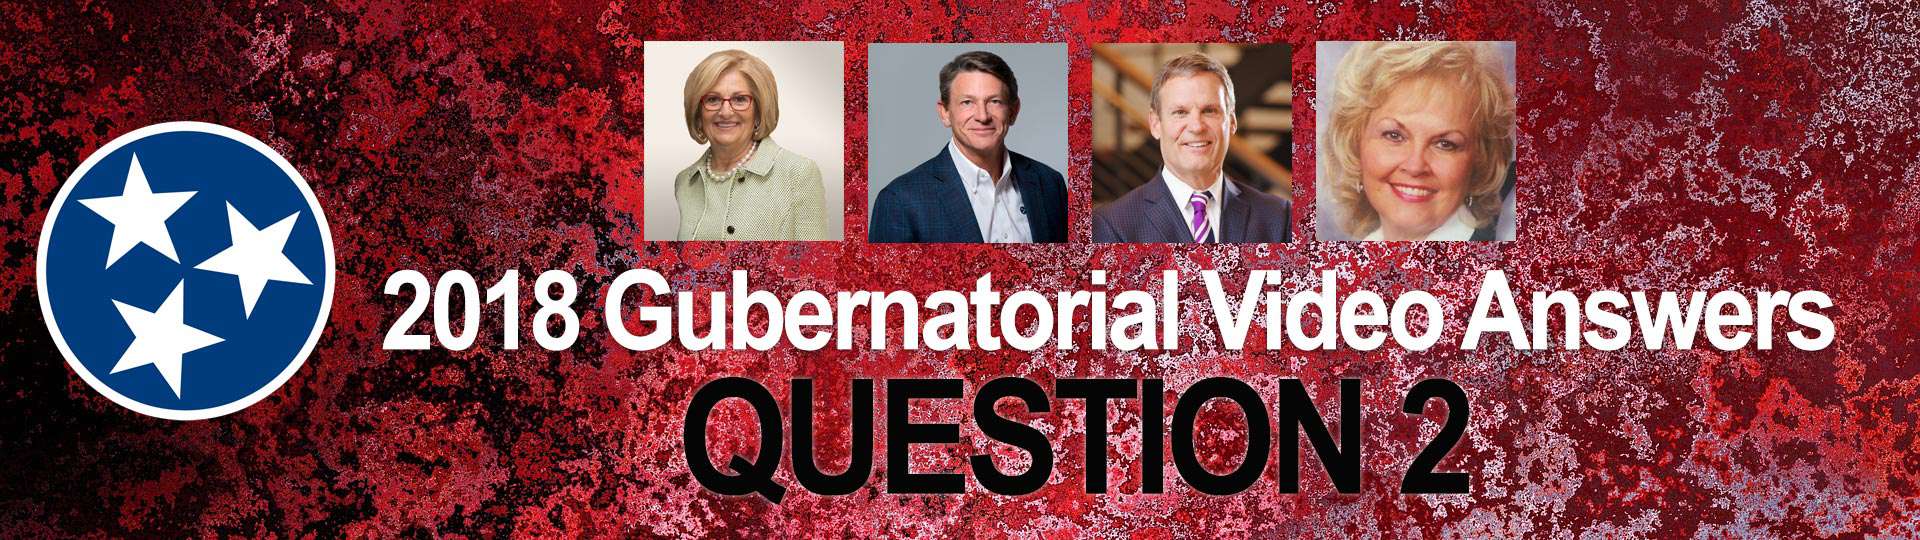 Tennessee's gubernatorial candidates answers to video question 2